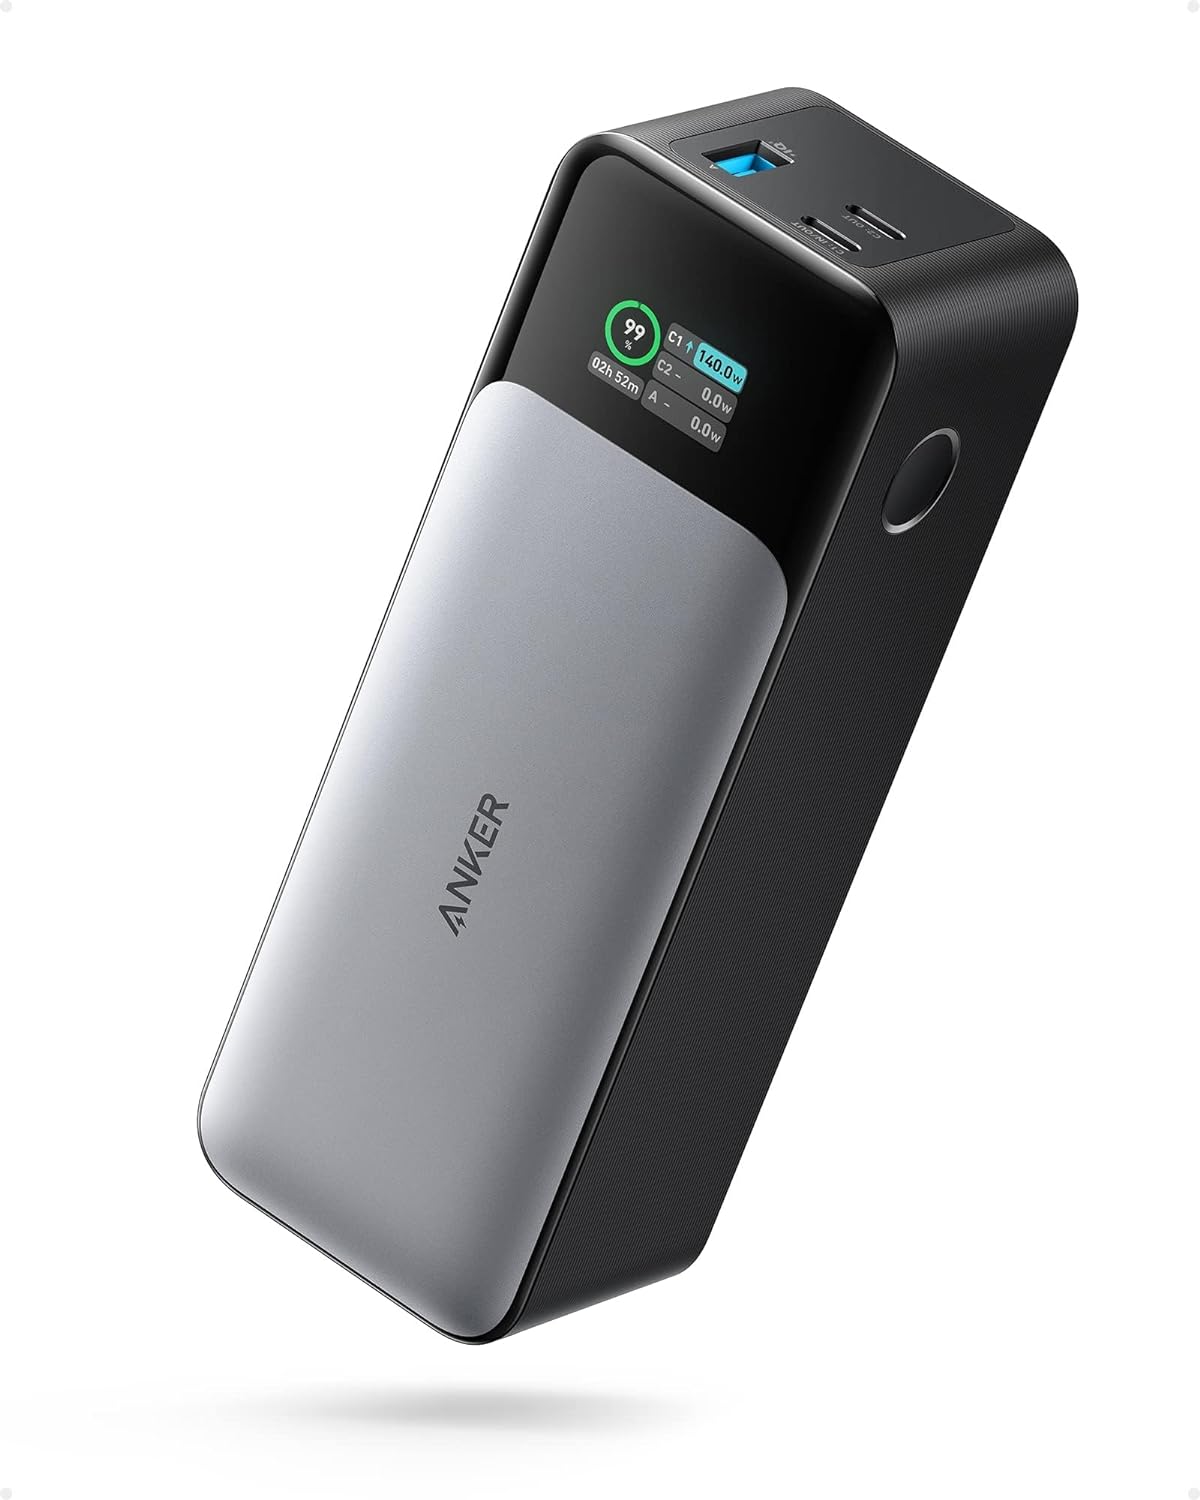 dead-Anker 737 Power Bank, 24,000mAh 3-Port Portable Charger with 140W Output, Smart Digital Display. $90 at AnkerDirect via Amazon